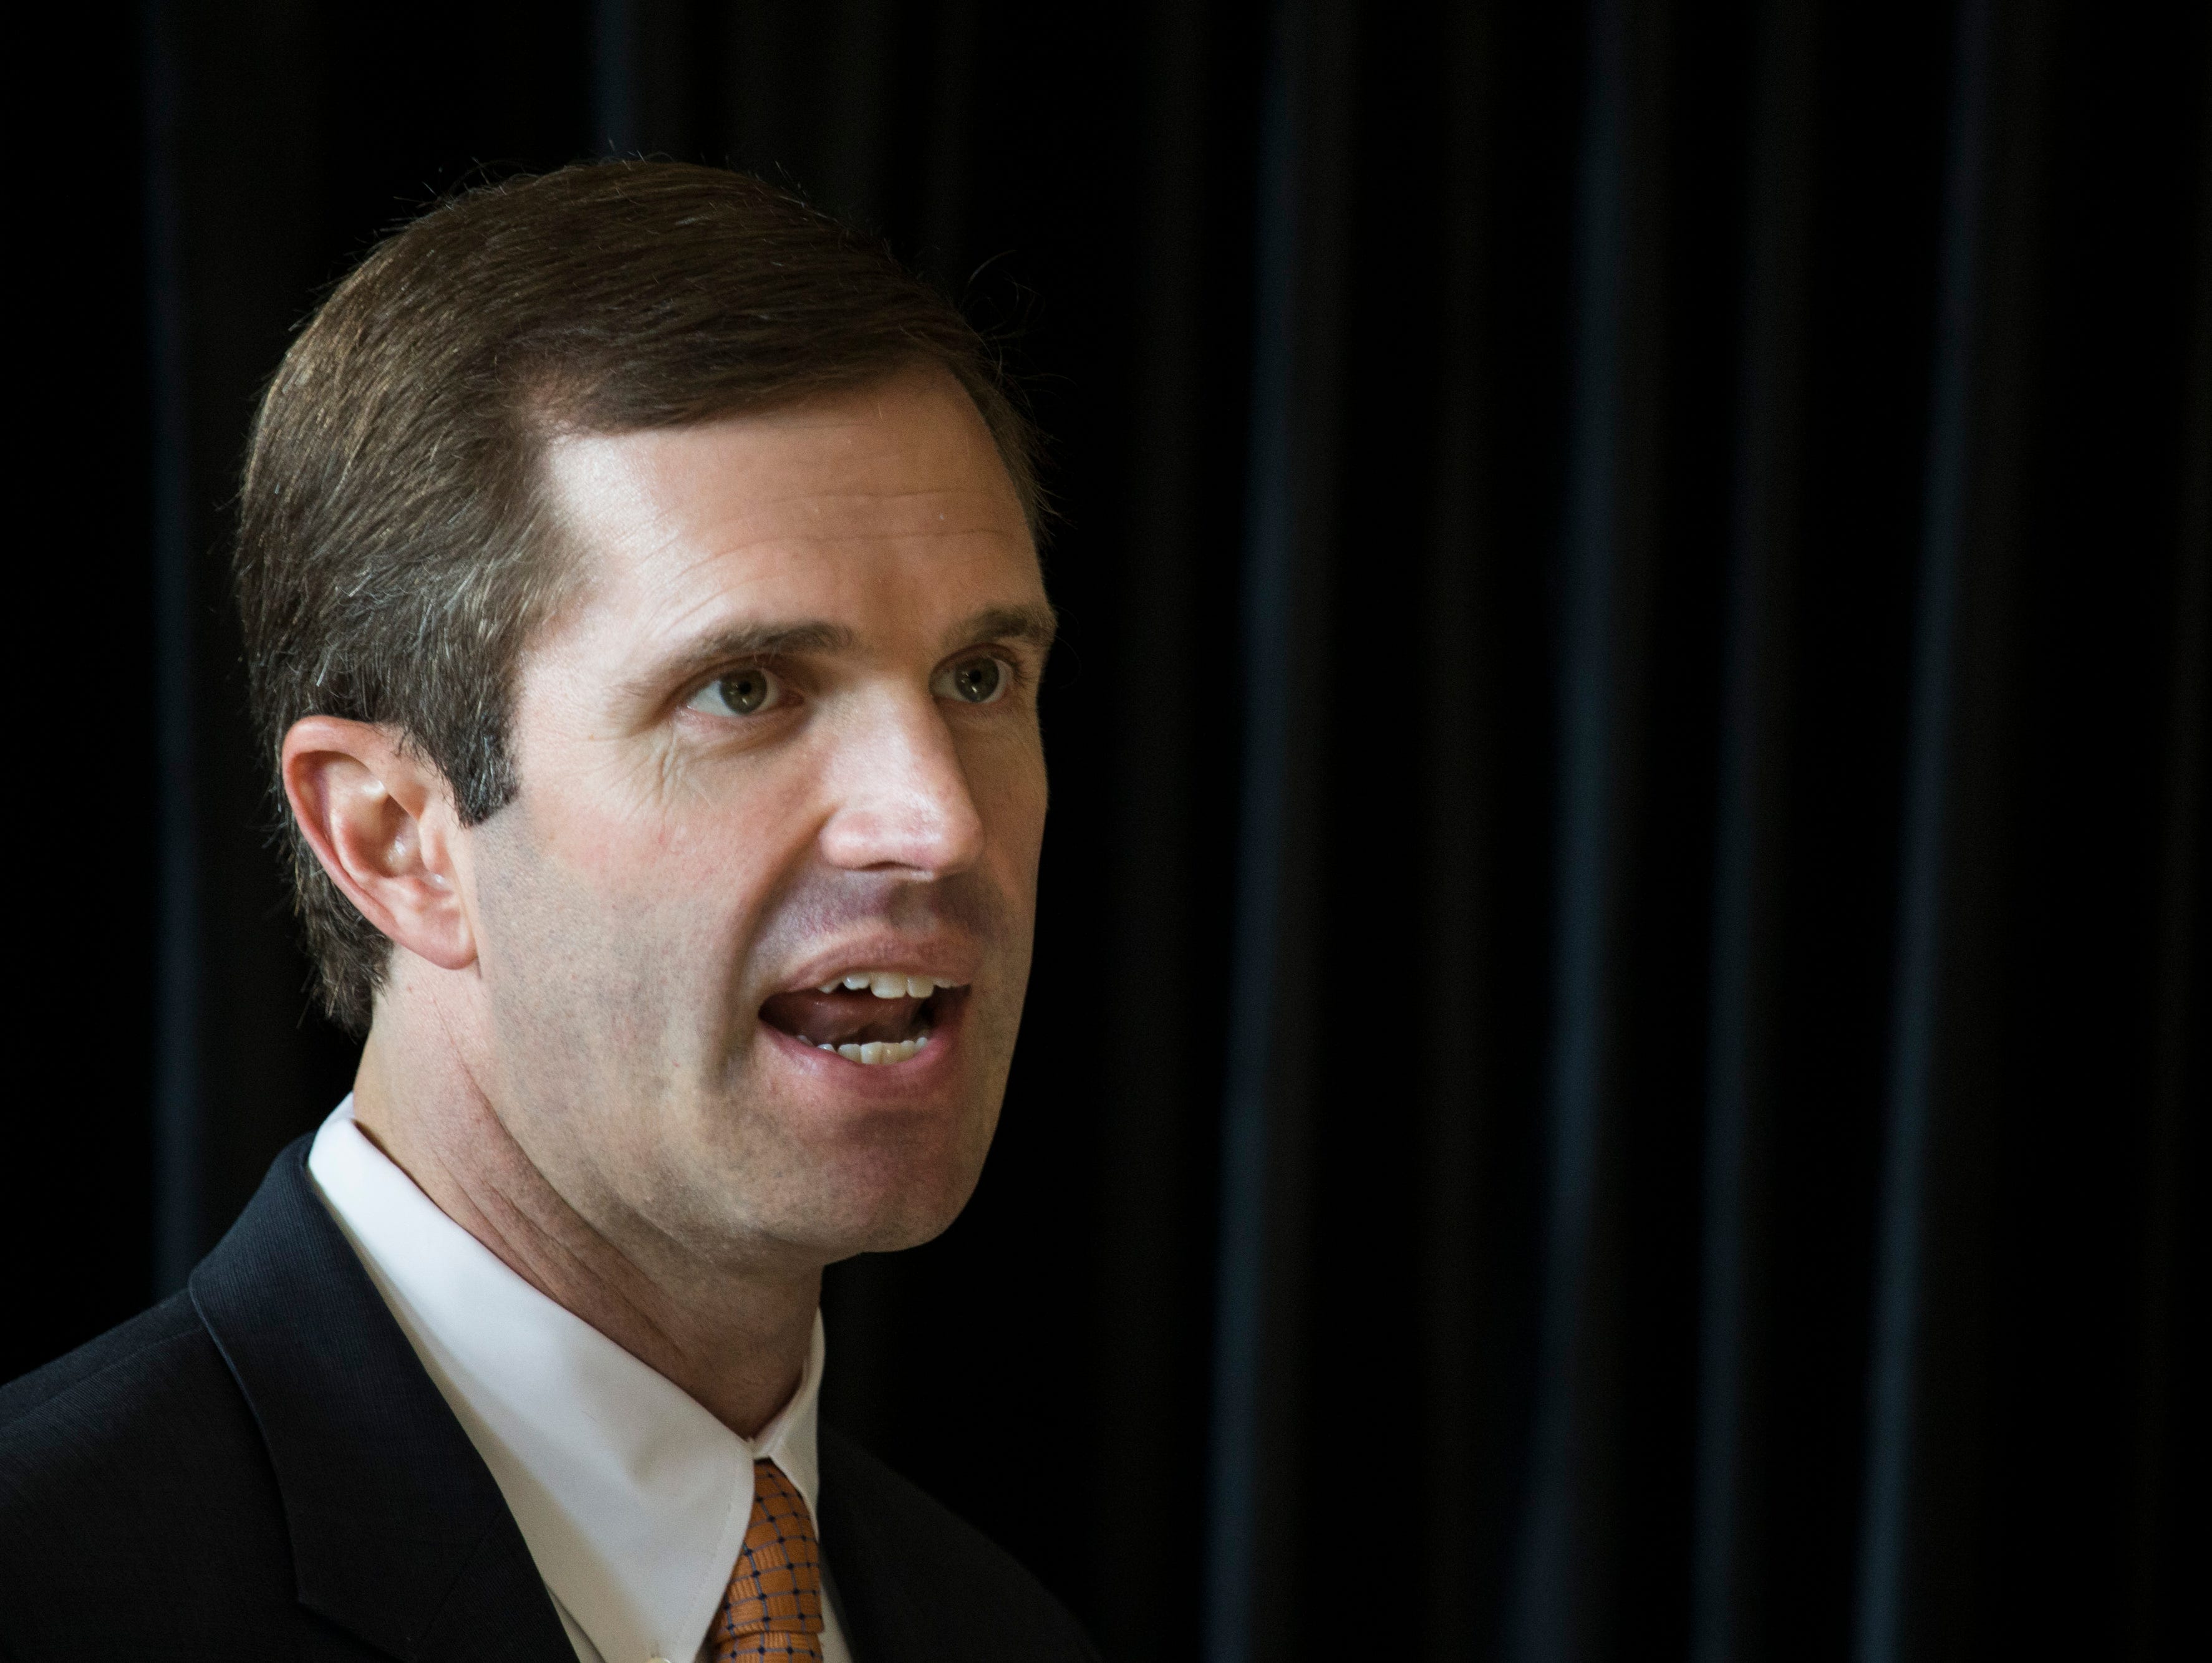 impeach andy beshear petition